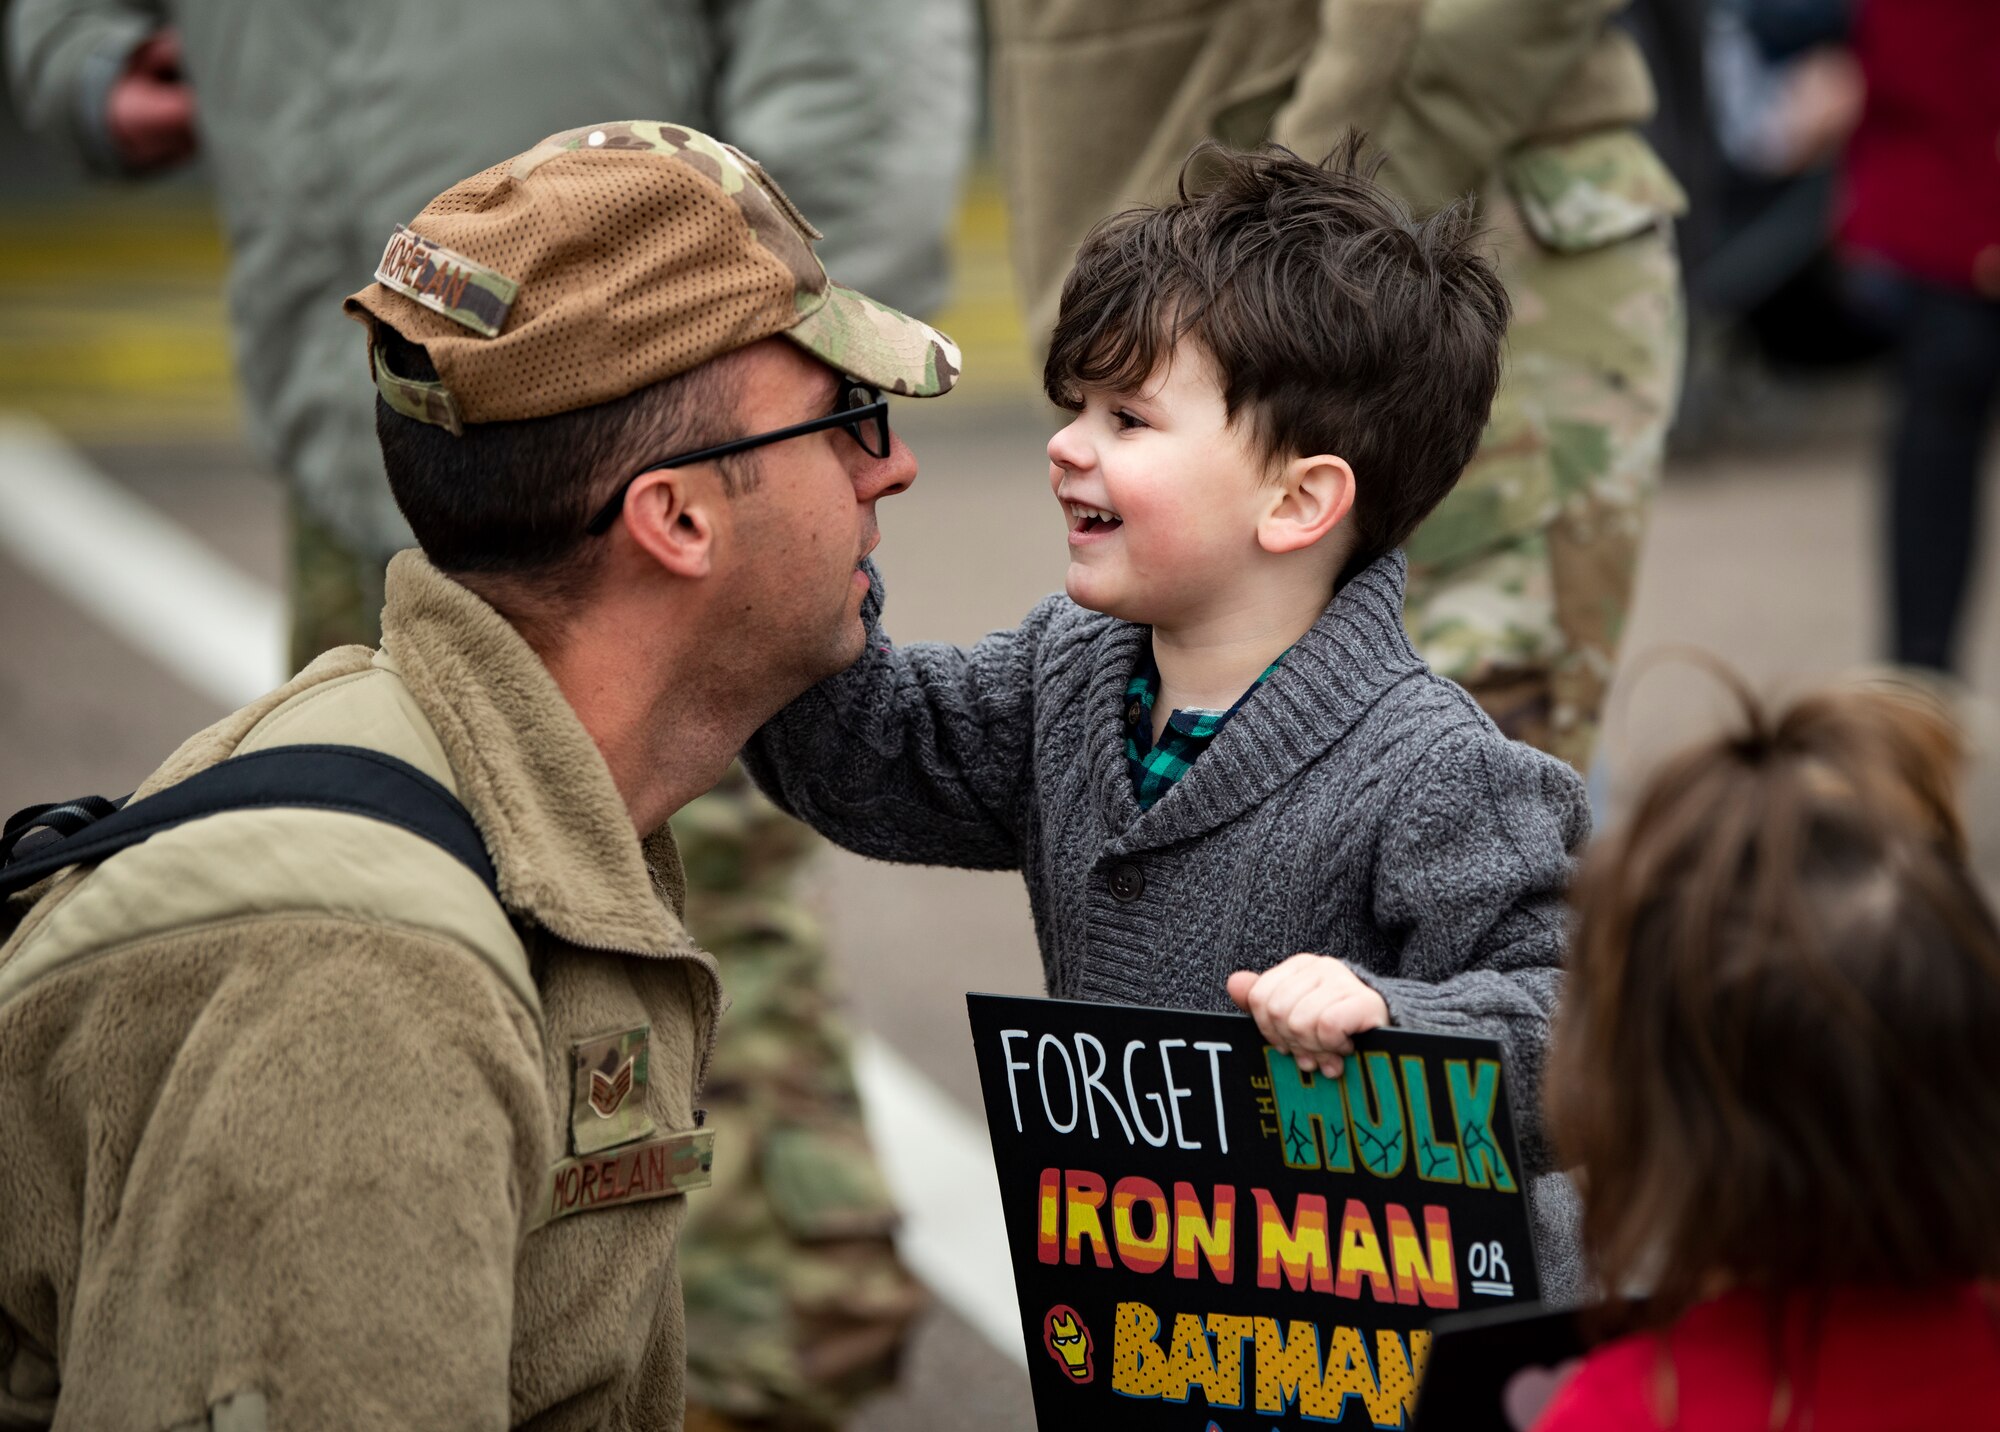 Friends and family welcome Airmen assigned to the 494th Fighter Squadron home from deployment at Royal Air Force Lakenheath, England, March 5, 2020. Airmen from the 48th Fighter Wing returned from a deployment supporting U.S. Air Force Central Command. (U.S. Air Force photo by Airman 1st Class Madeline Herzog)